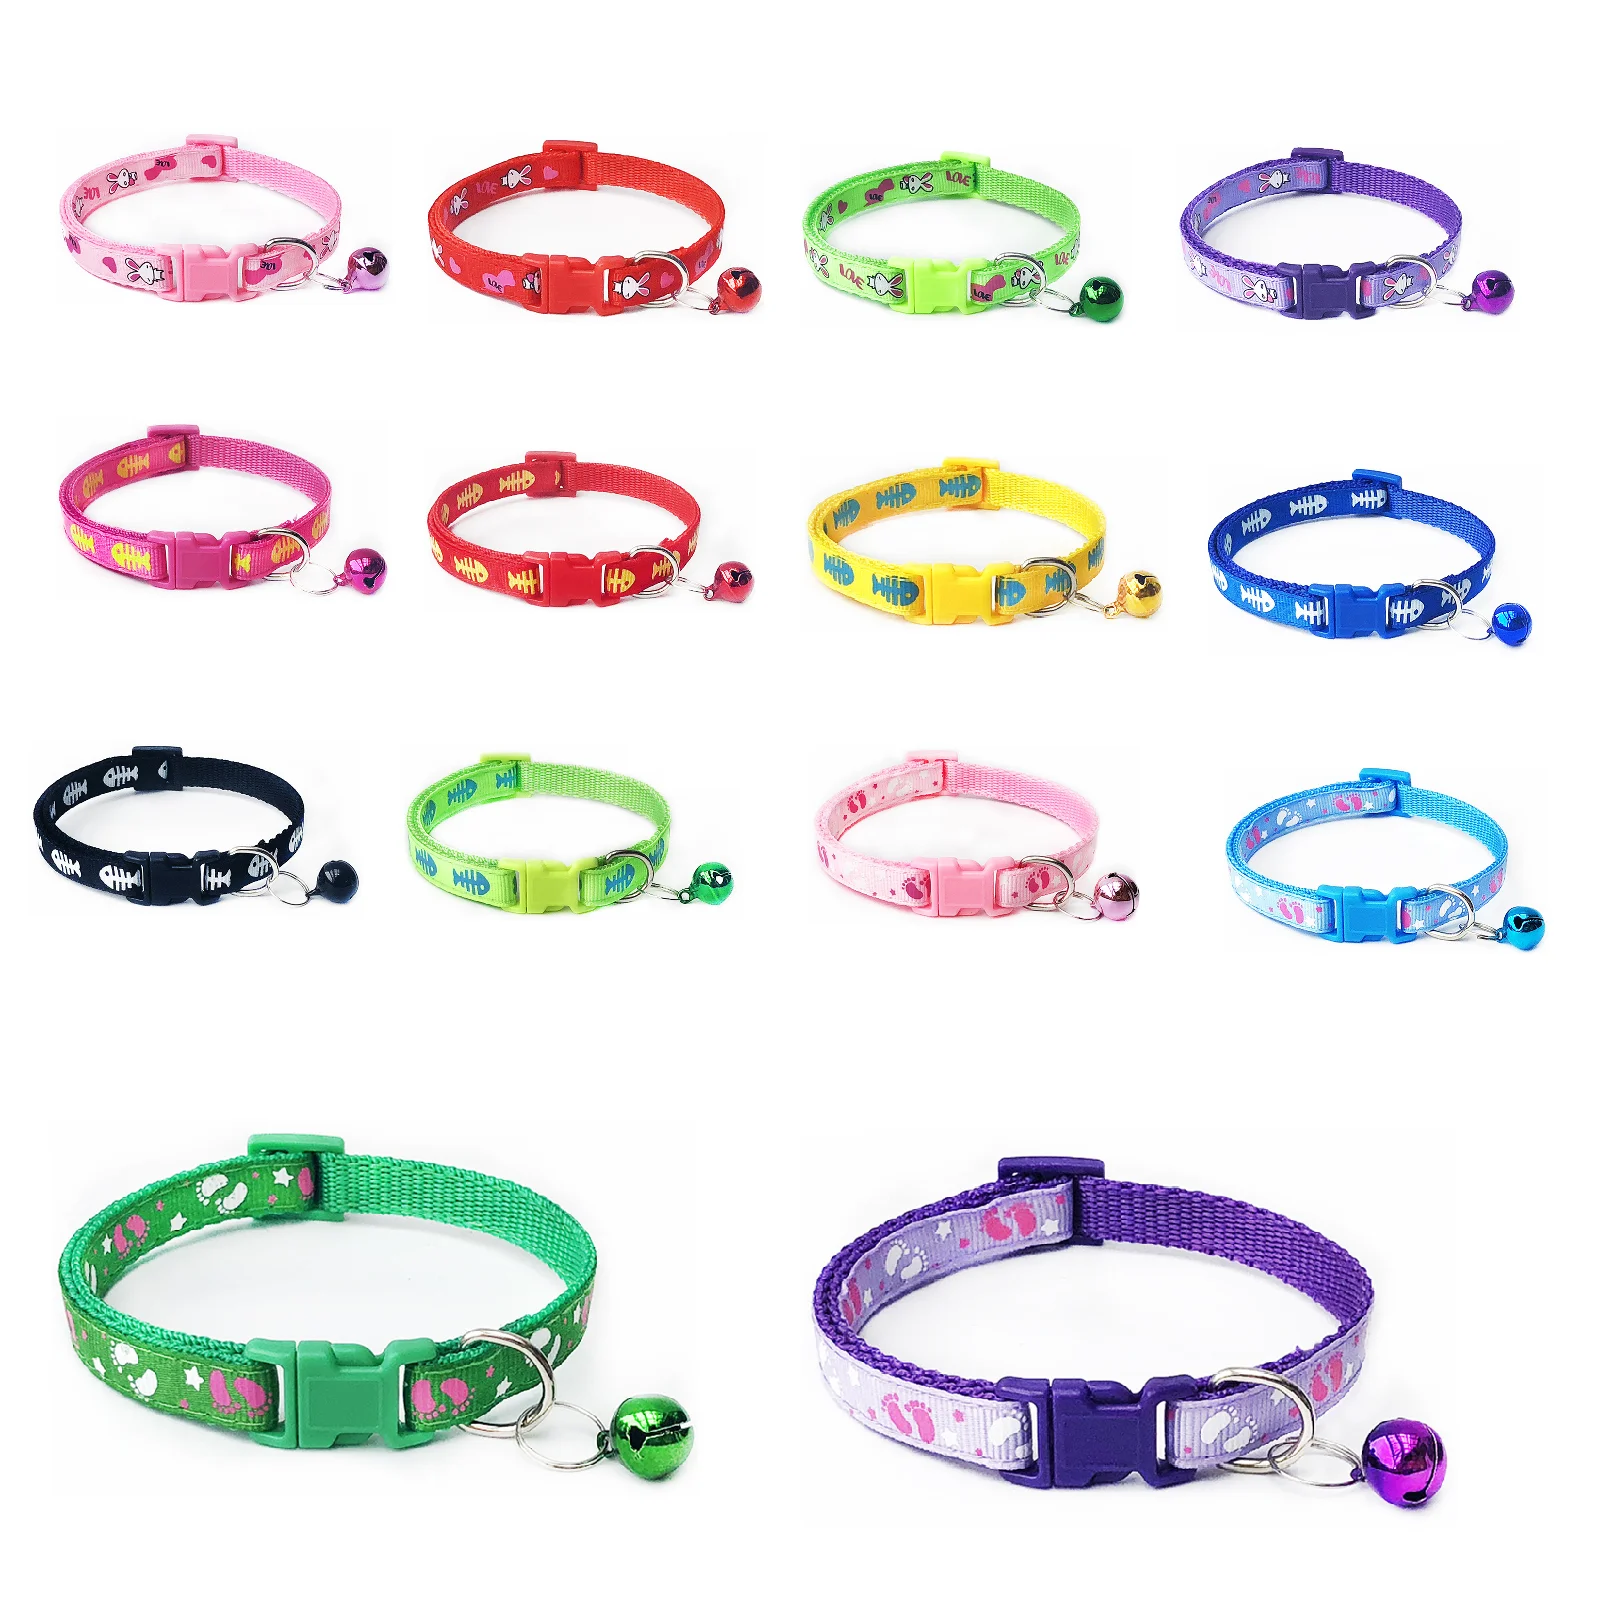 1pc Cartoon Dog Cat Collars With Bell Adjustable Polyester Buckle Collar Cat Pet Supplies Accessories Collar Small Dog Necklace 2pcs cartoon dog cat collars with bell adjustable nylon buckle collar cat pet supplies accessories collar small dog chihuahua